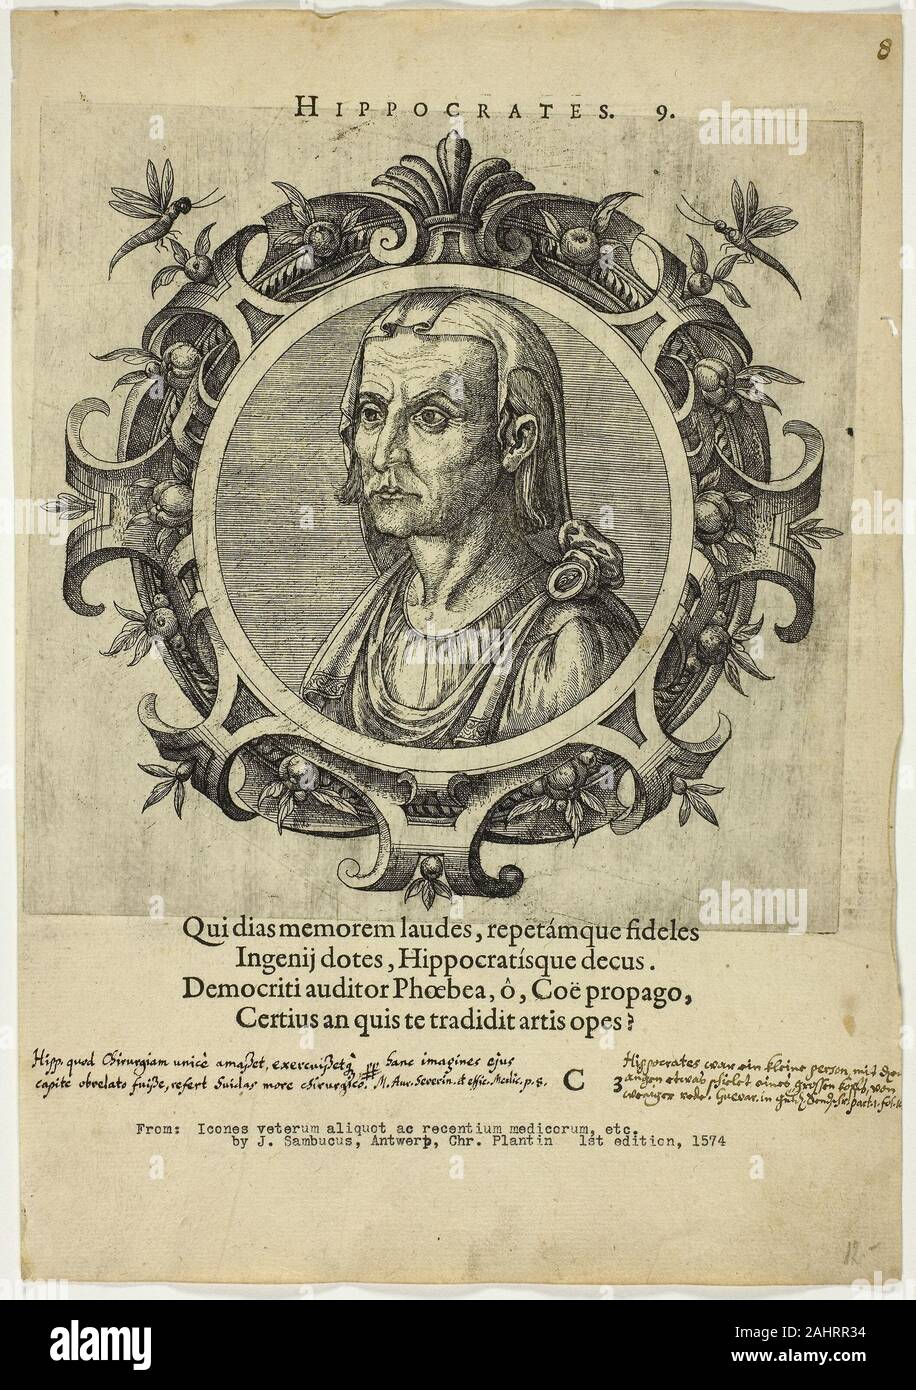 Johannes Sambucus (Author). Portrait of Hippocrates. 1574. Flanders. Etching, with engraving, on cream laid paper Stock Photo